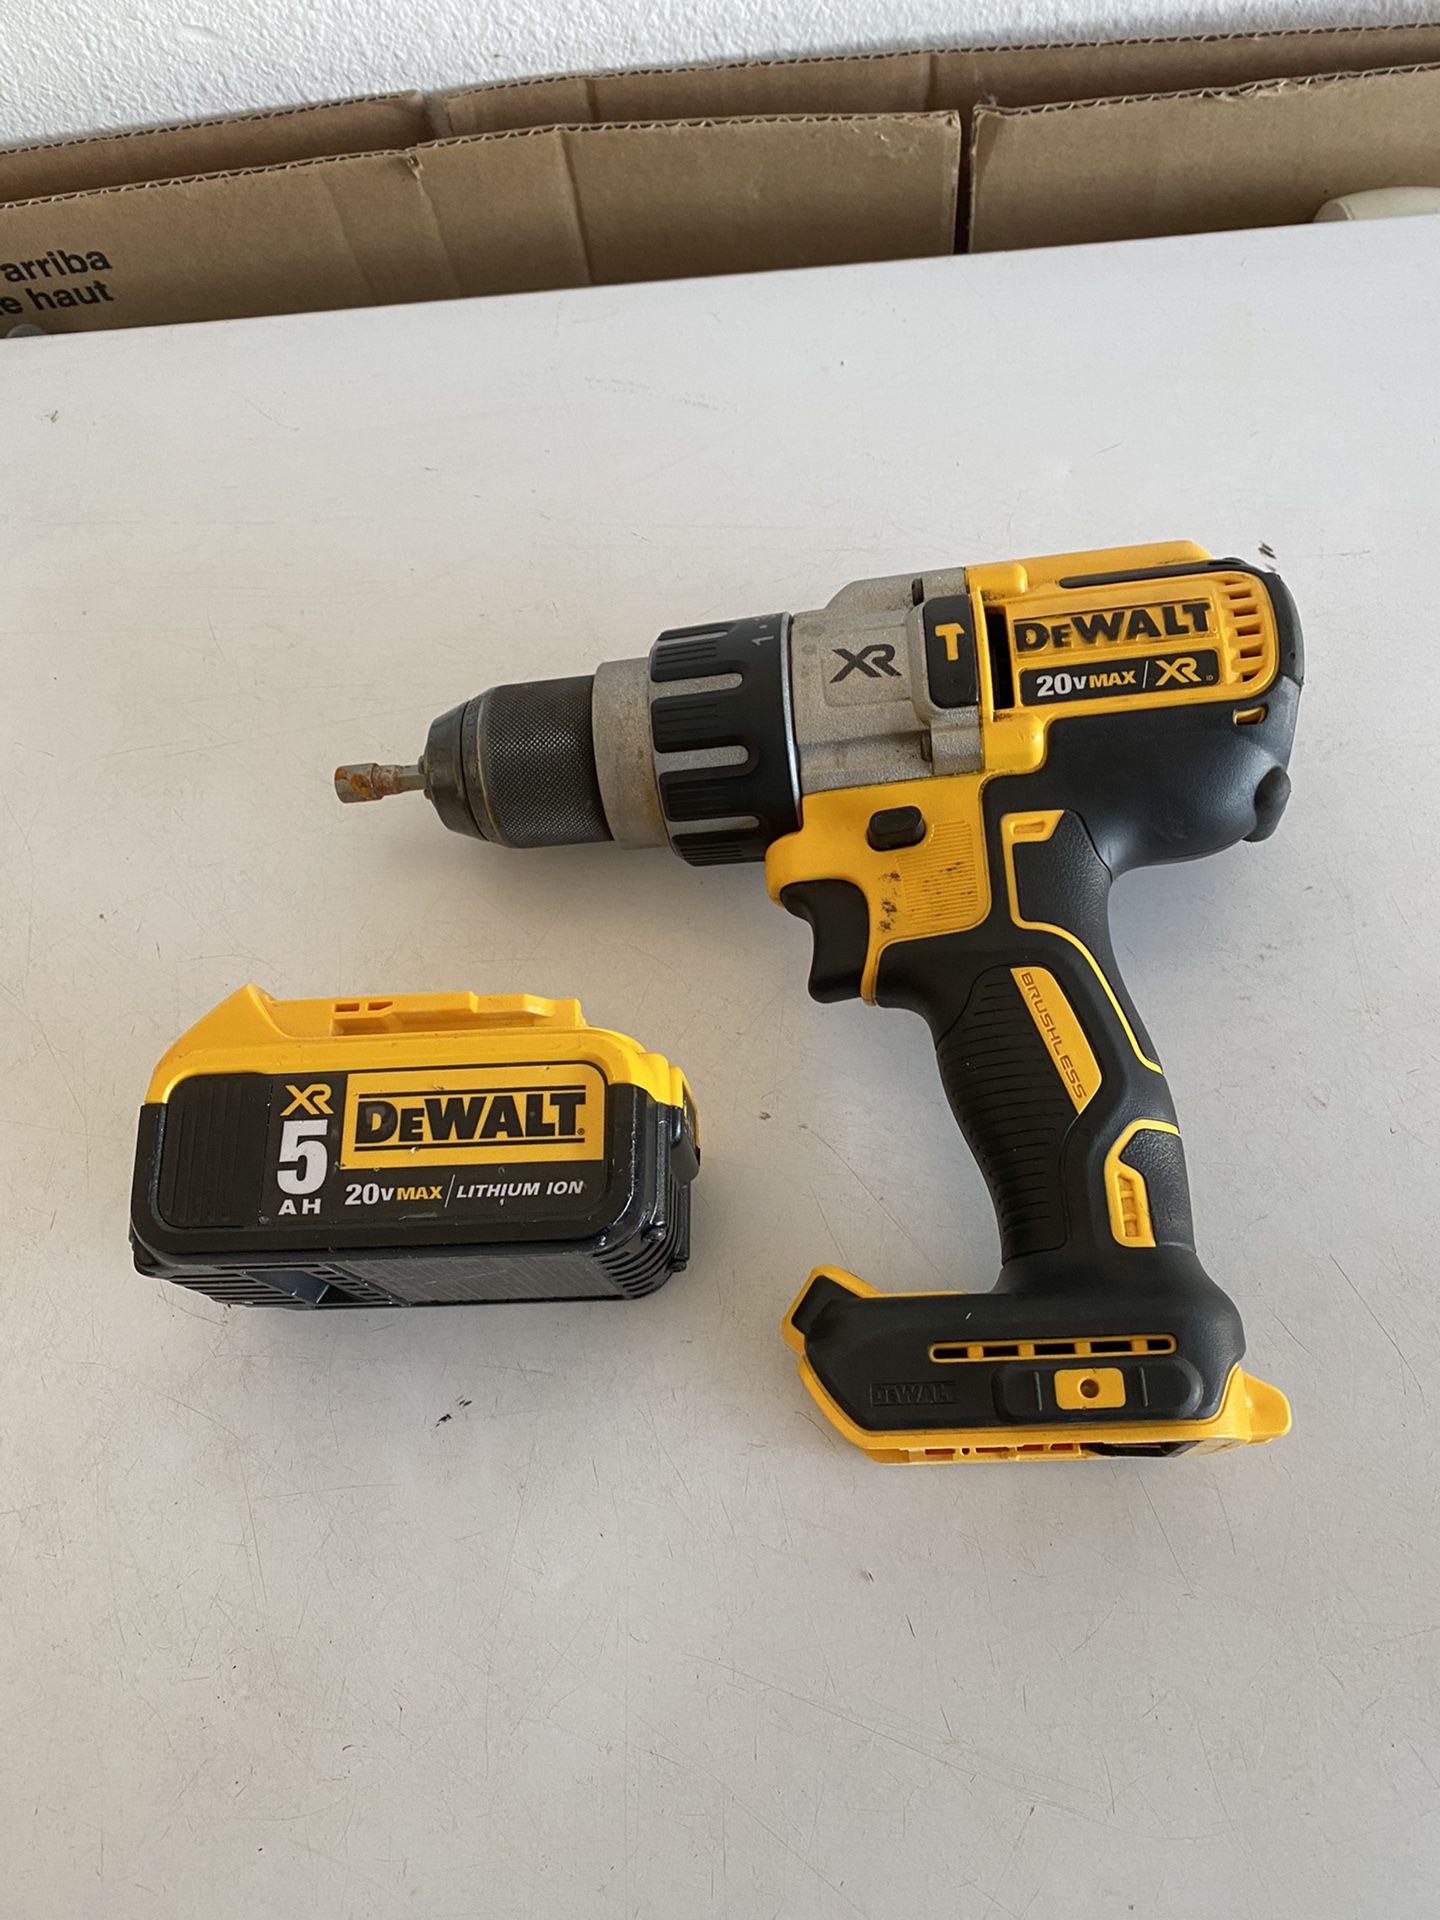 Dewalt drill batery but no charger